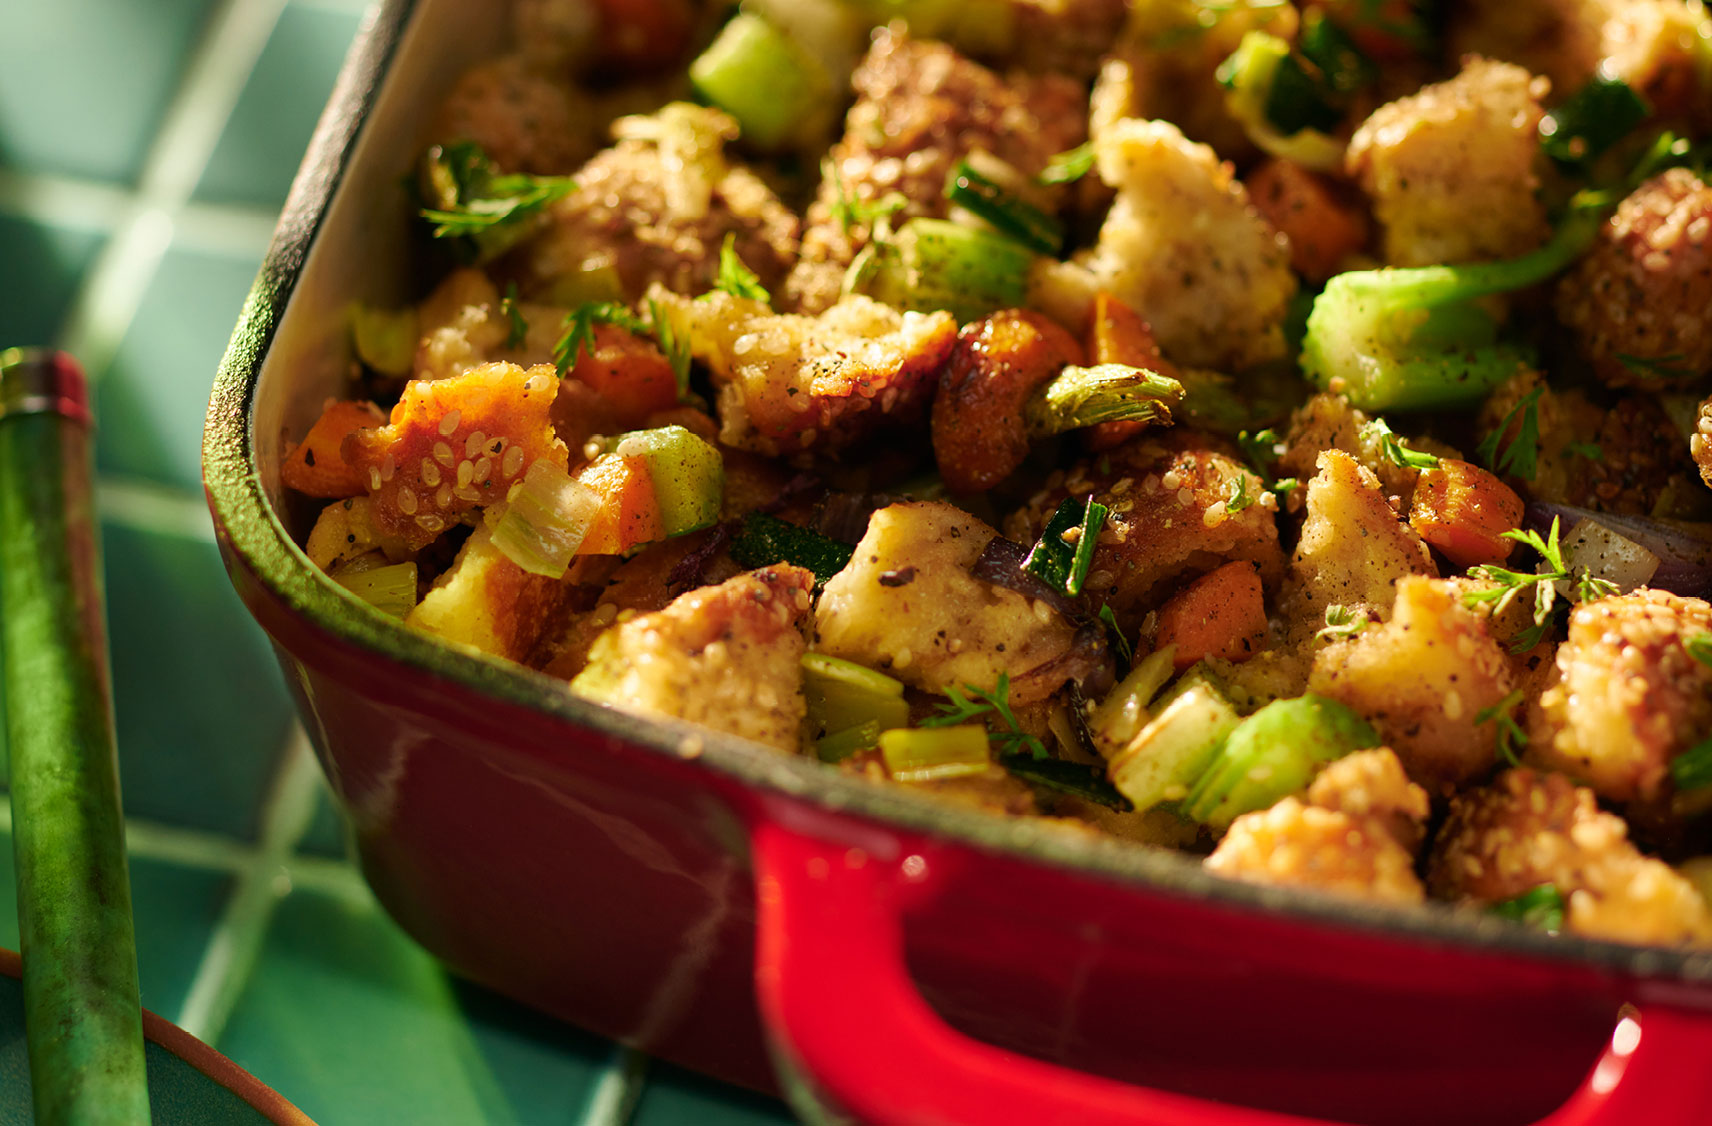 A ceramic baking dish filled with a freshly baked stuffing filled with chunks of vegetables and bread pieces.